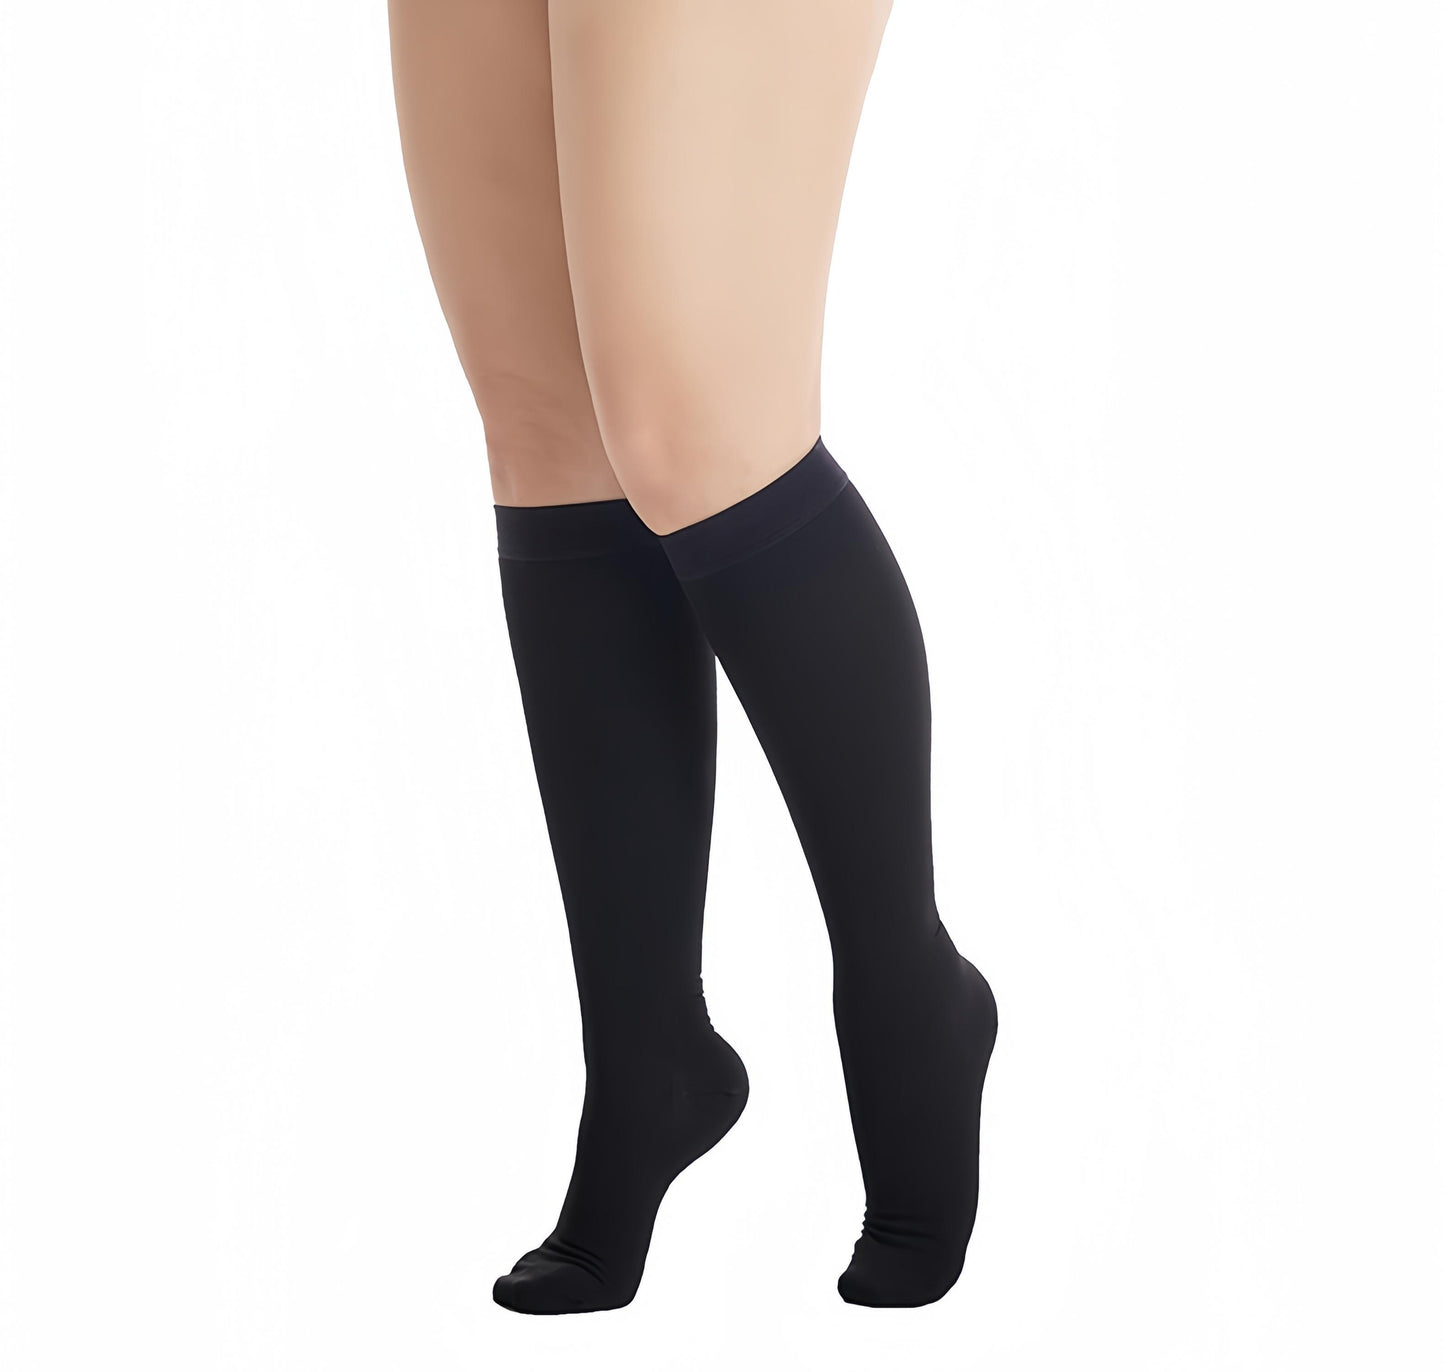 Compression Socks for Women & Men 2 pairs